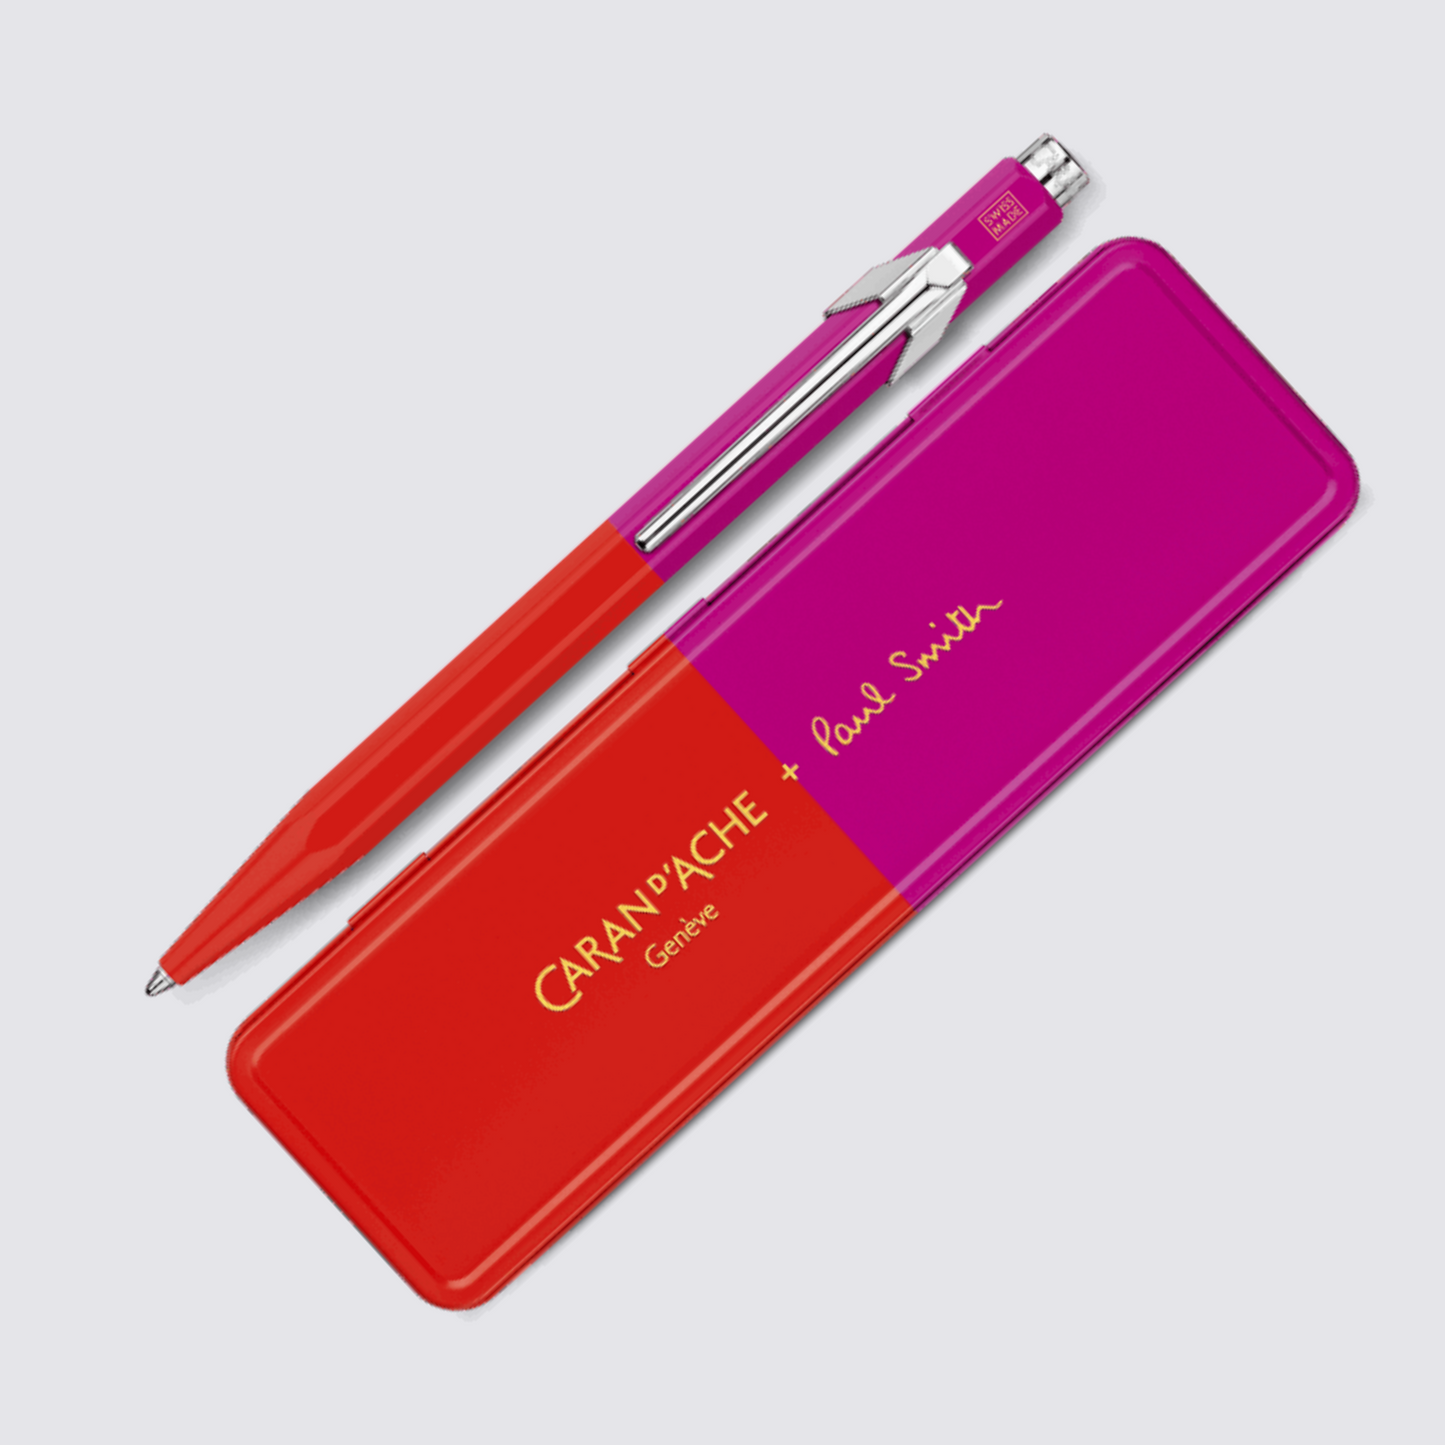 Paul Smith 849 Ballpoint Pink and Red